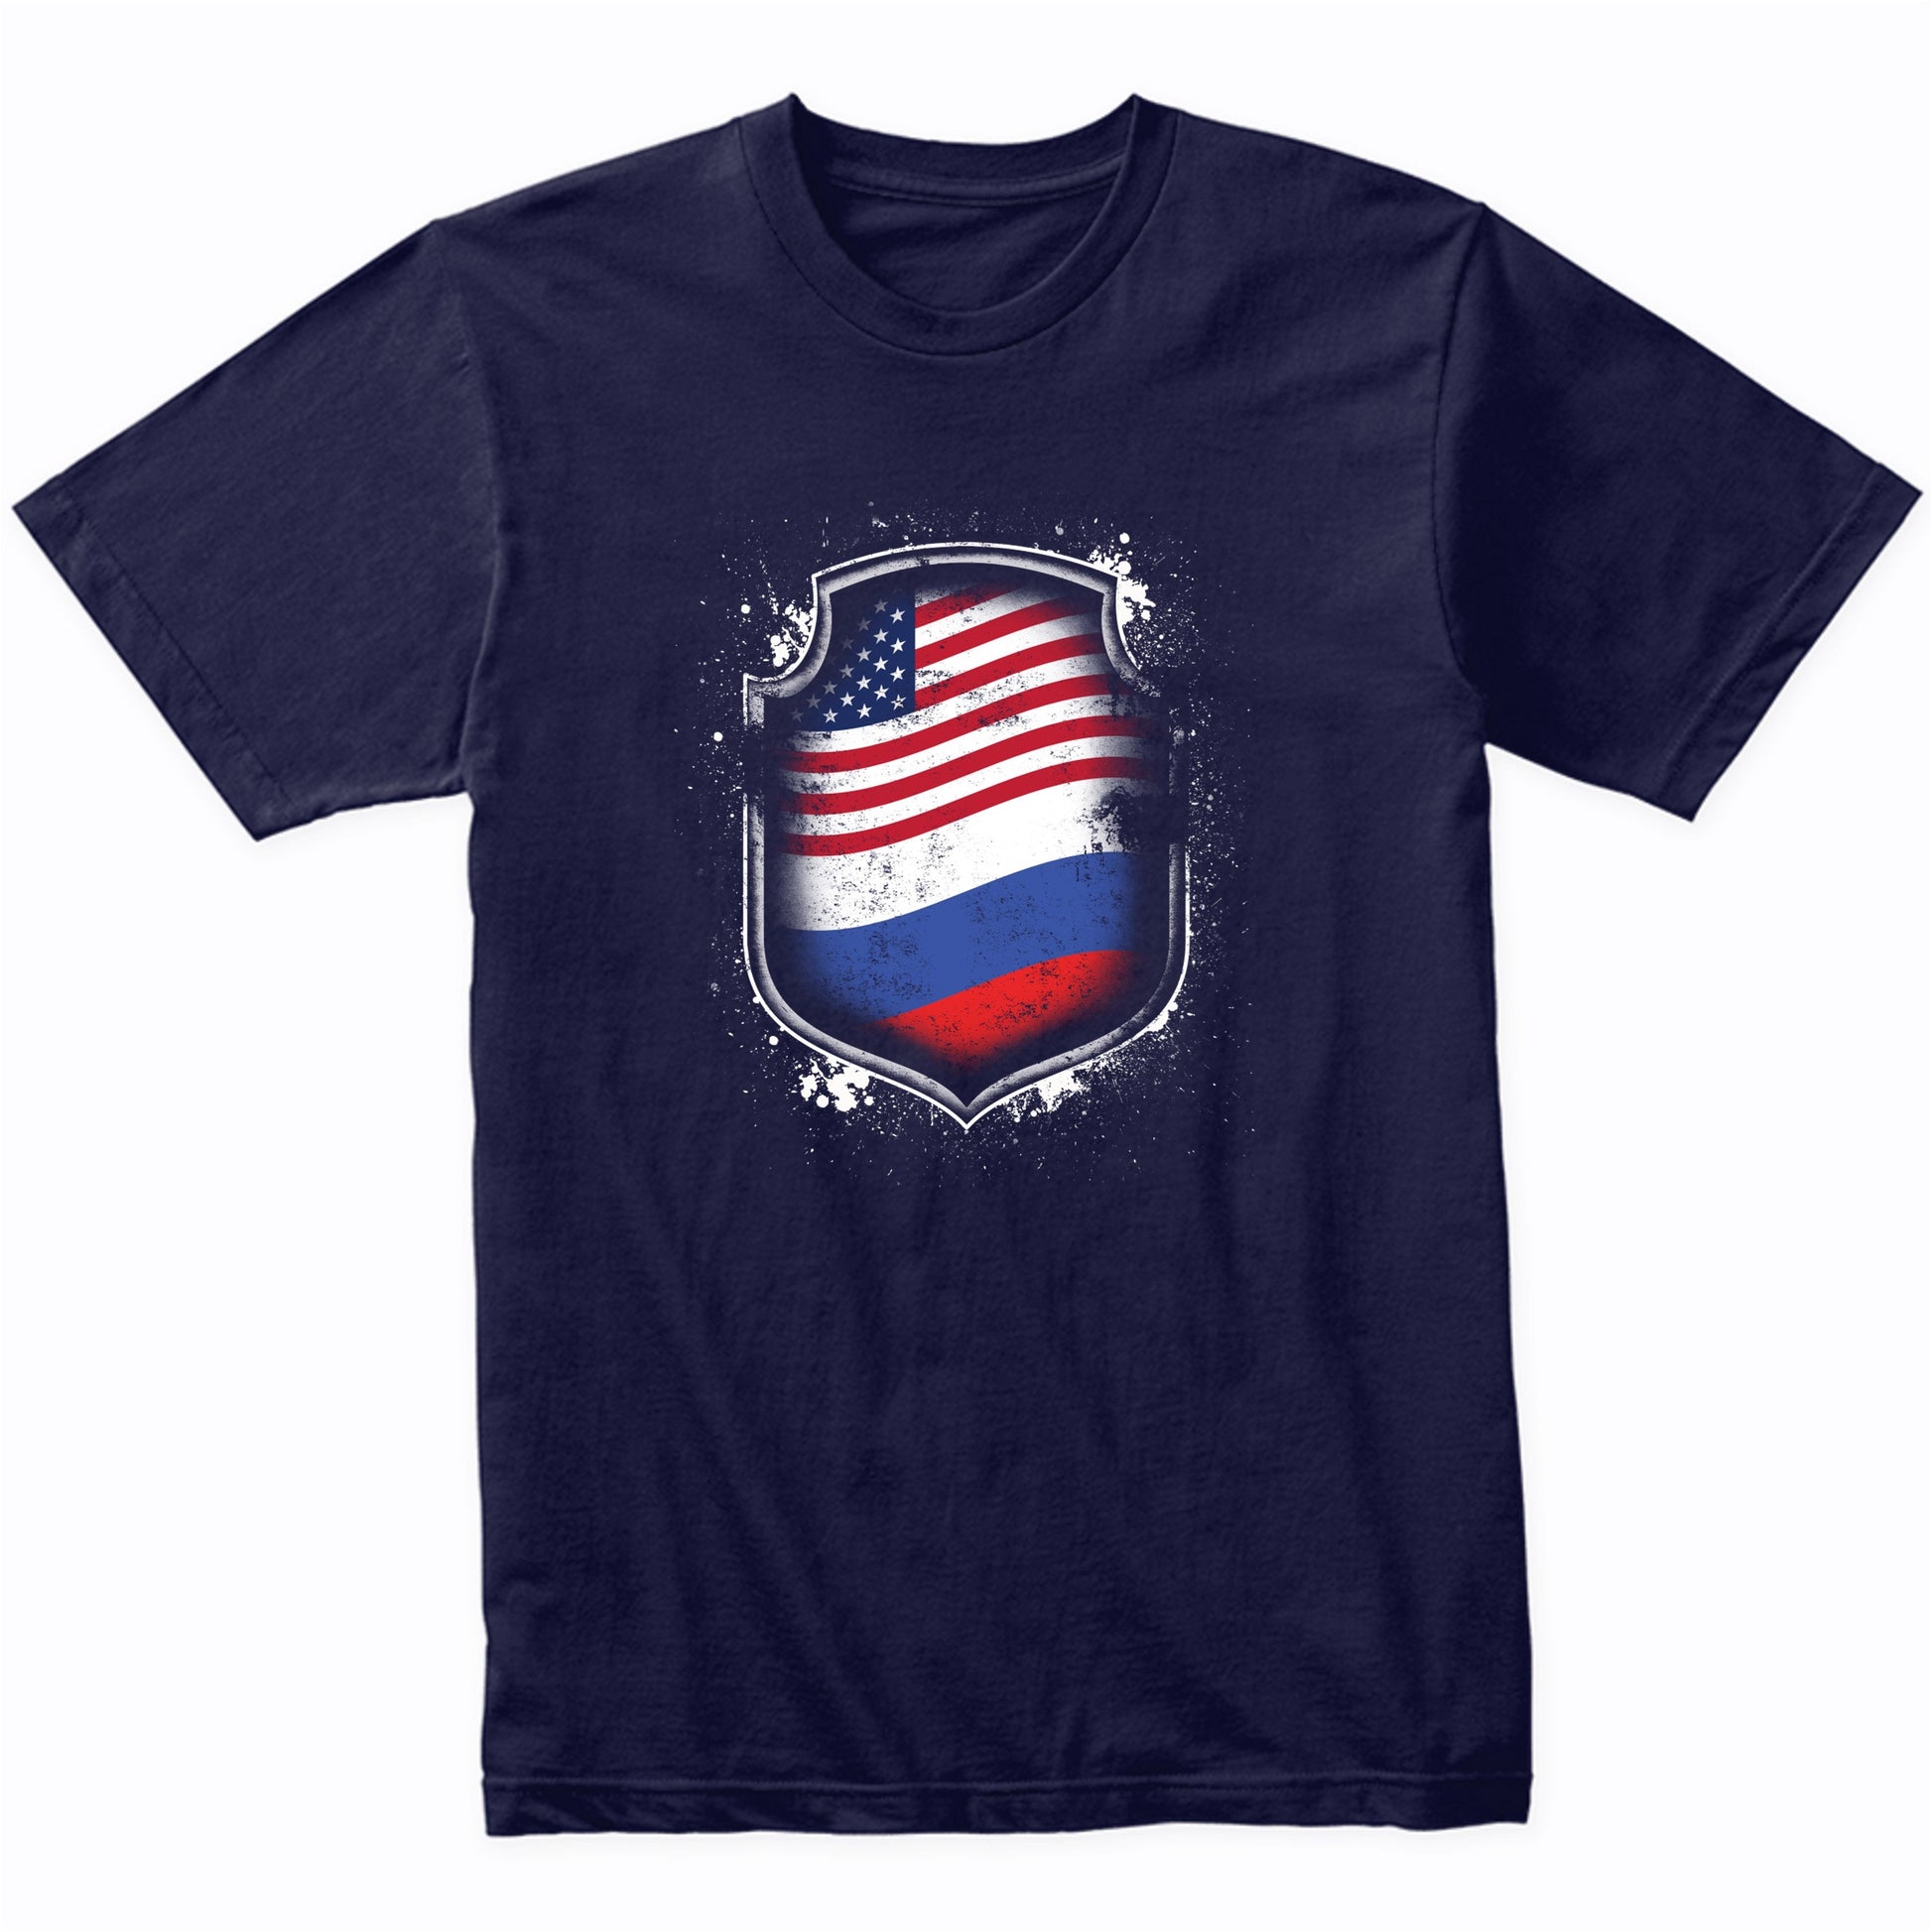 Russian American Shirt Flags Of Russia and America T-Shirt